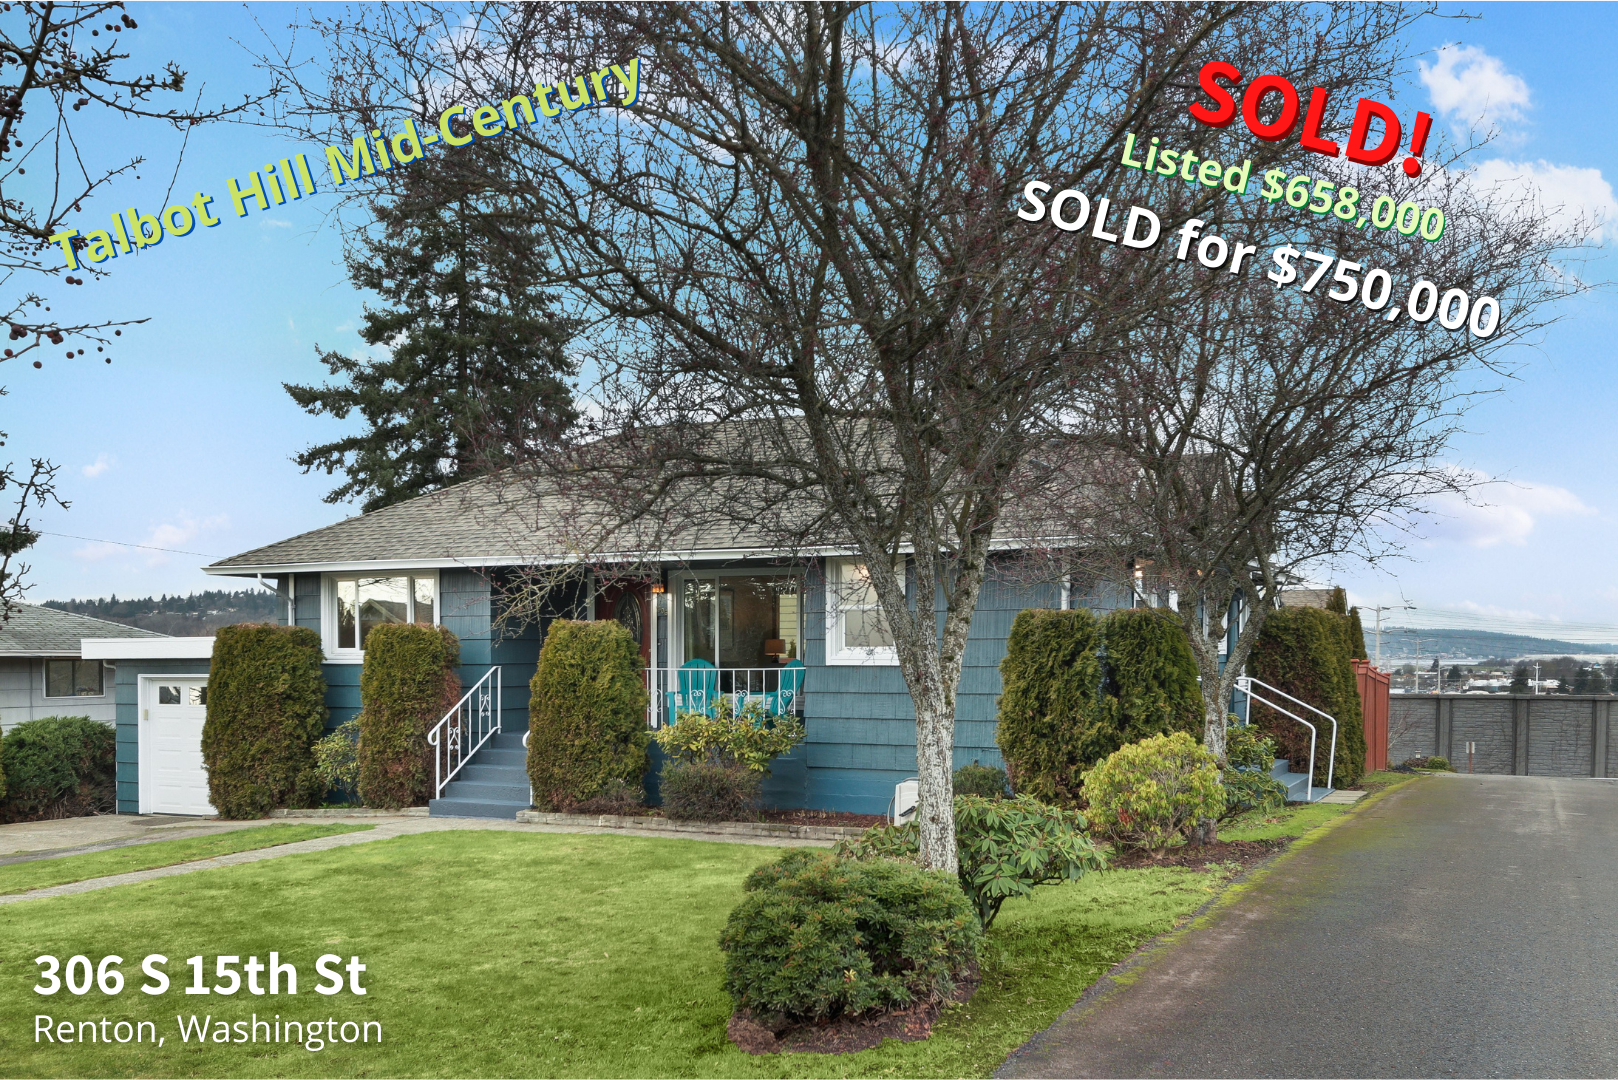 306 S 15th St - SOLD